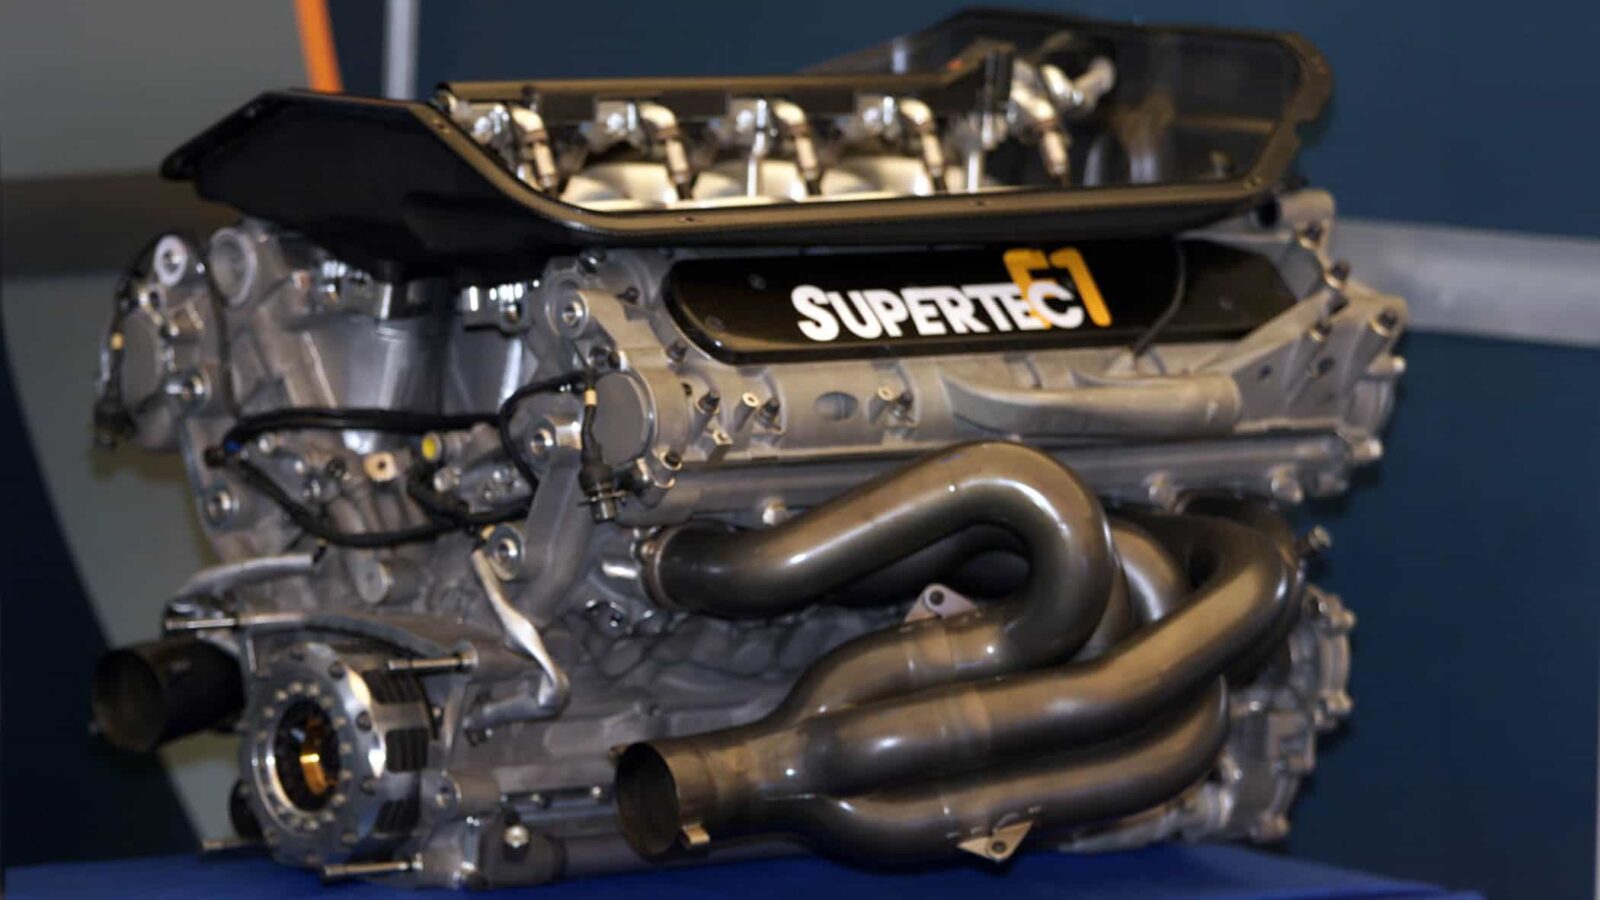 Supertec V10s Renault PUs and used by Benetton